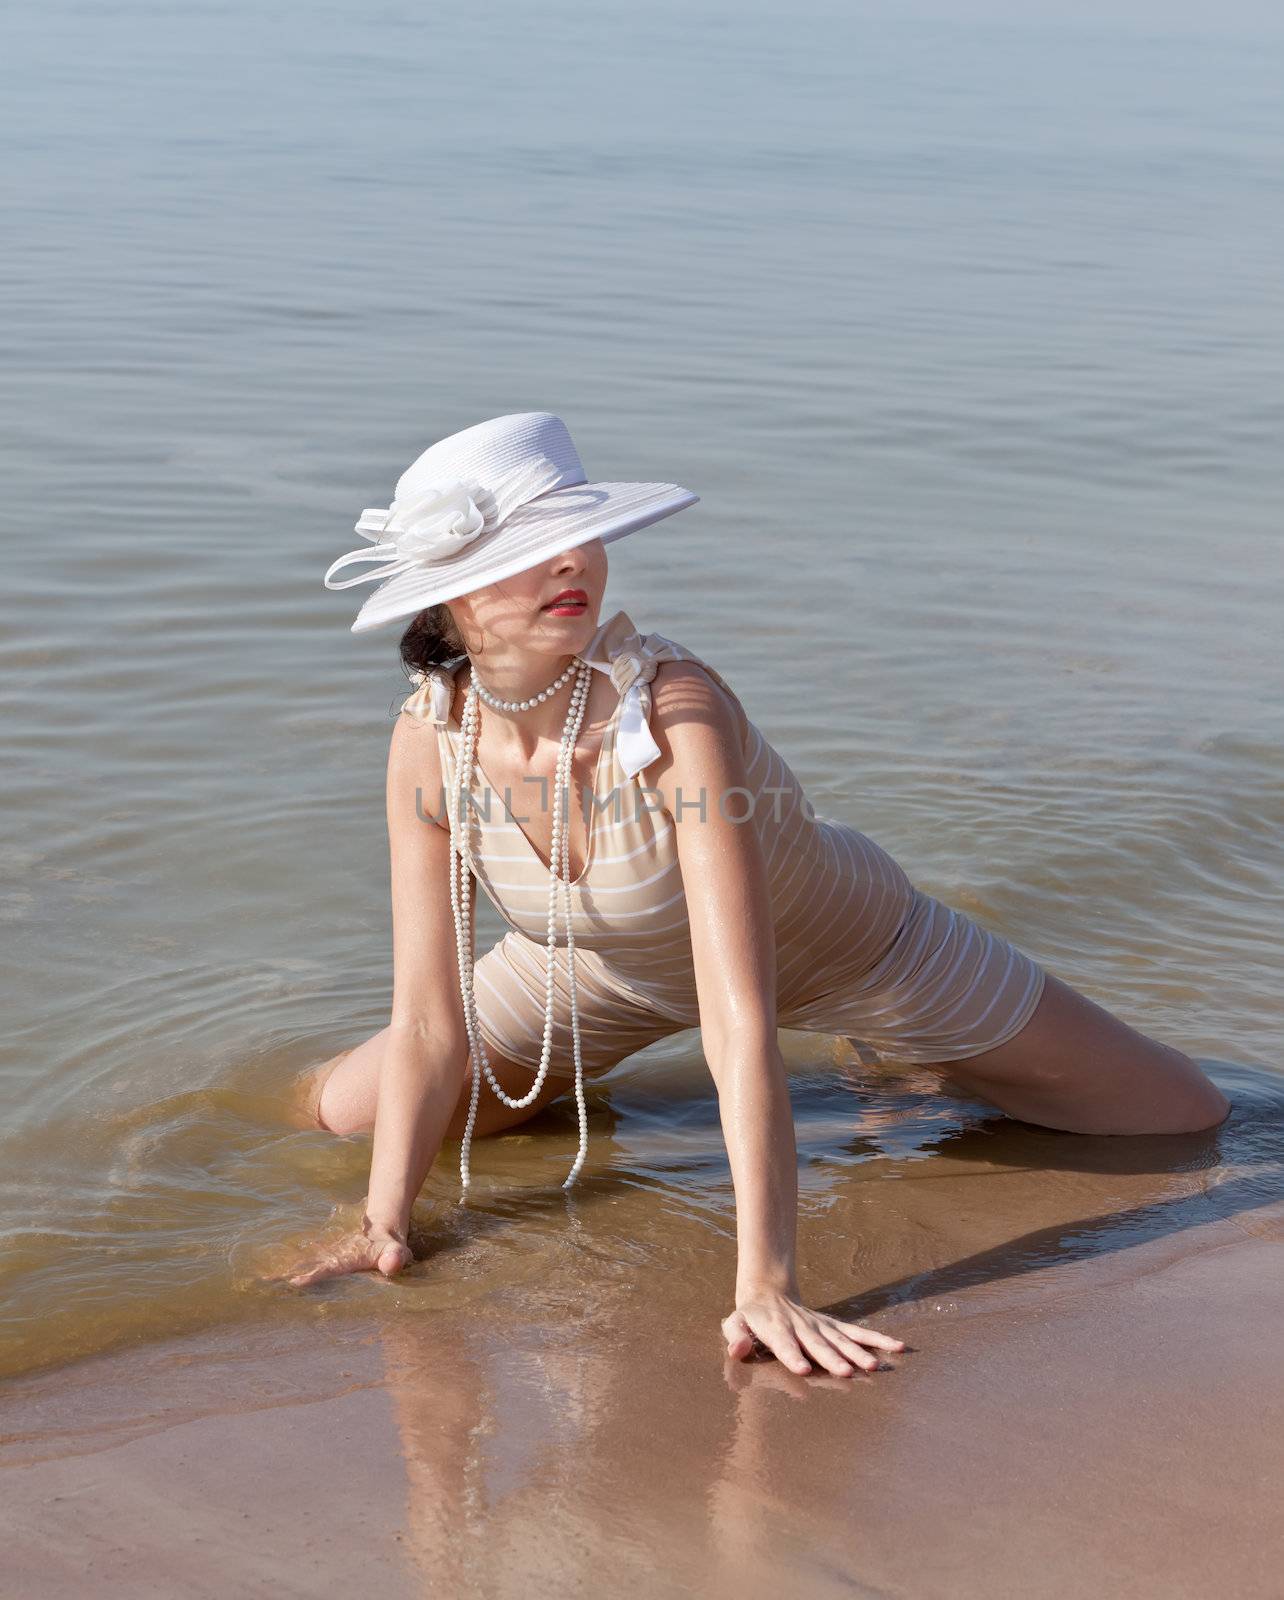 Woman in a striped retro bathing suit in the white hat posing against the sea